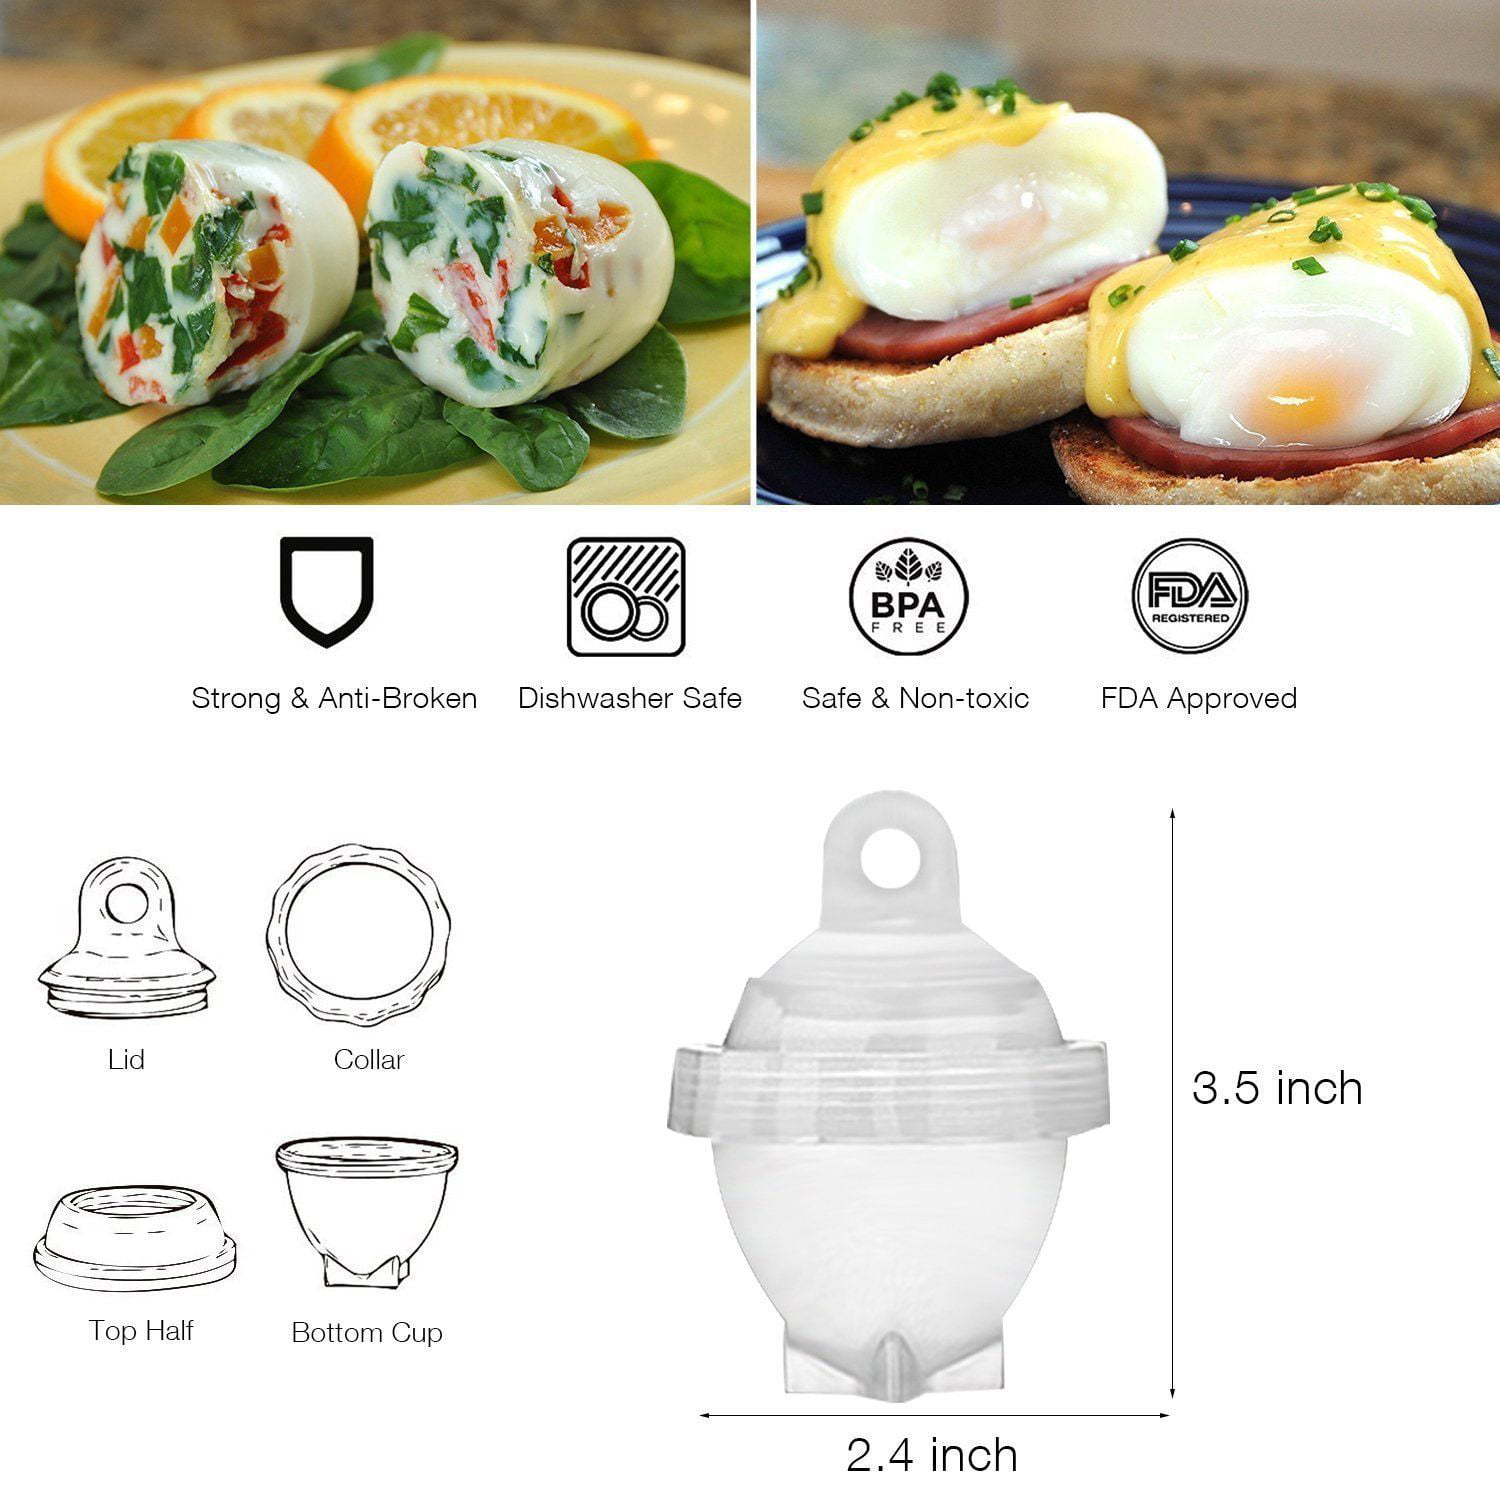 Electric Egg Cooker 7-Capacity BPA-Free Hard-Boiled Egg Maker with Auto-Off  Measuring Cup, 1 unit - Harris Teeter